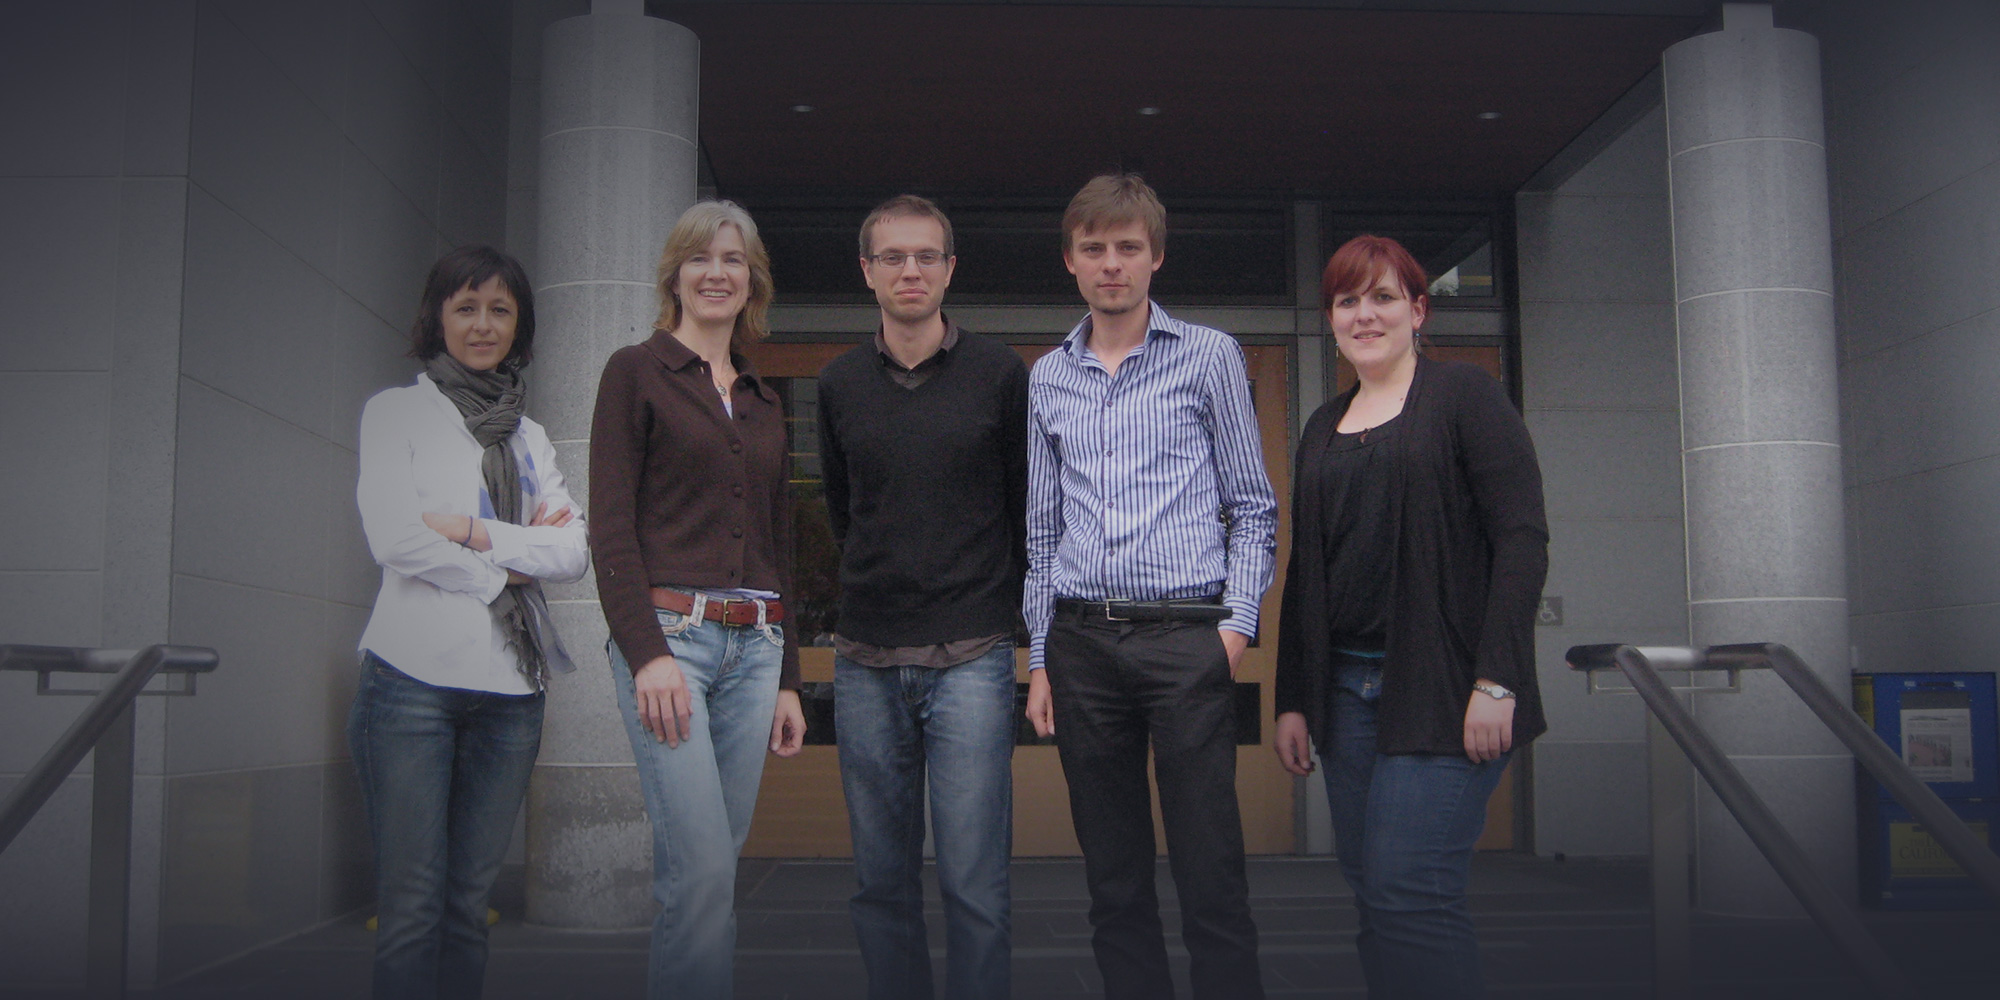 Emmanuelle Charpentier, Jennifer Doudna and the full team from the 2012 CRISPR paper